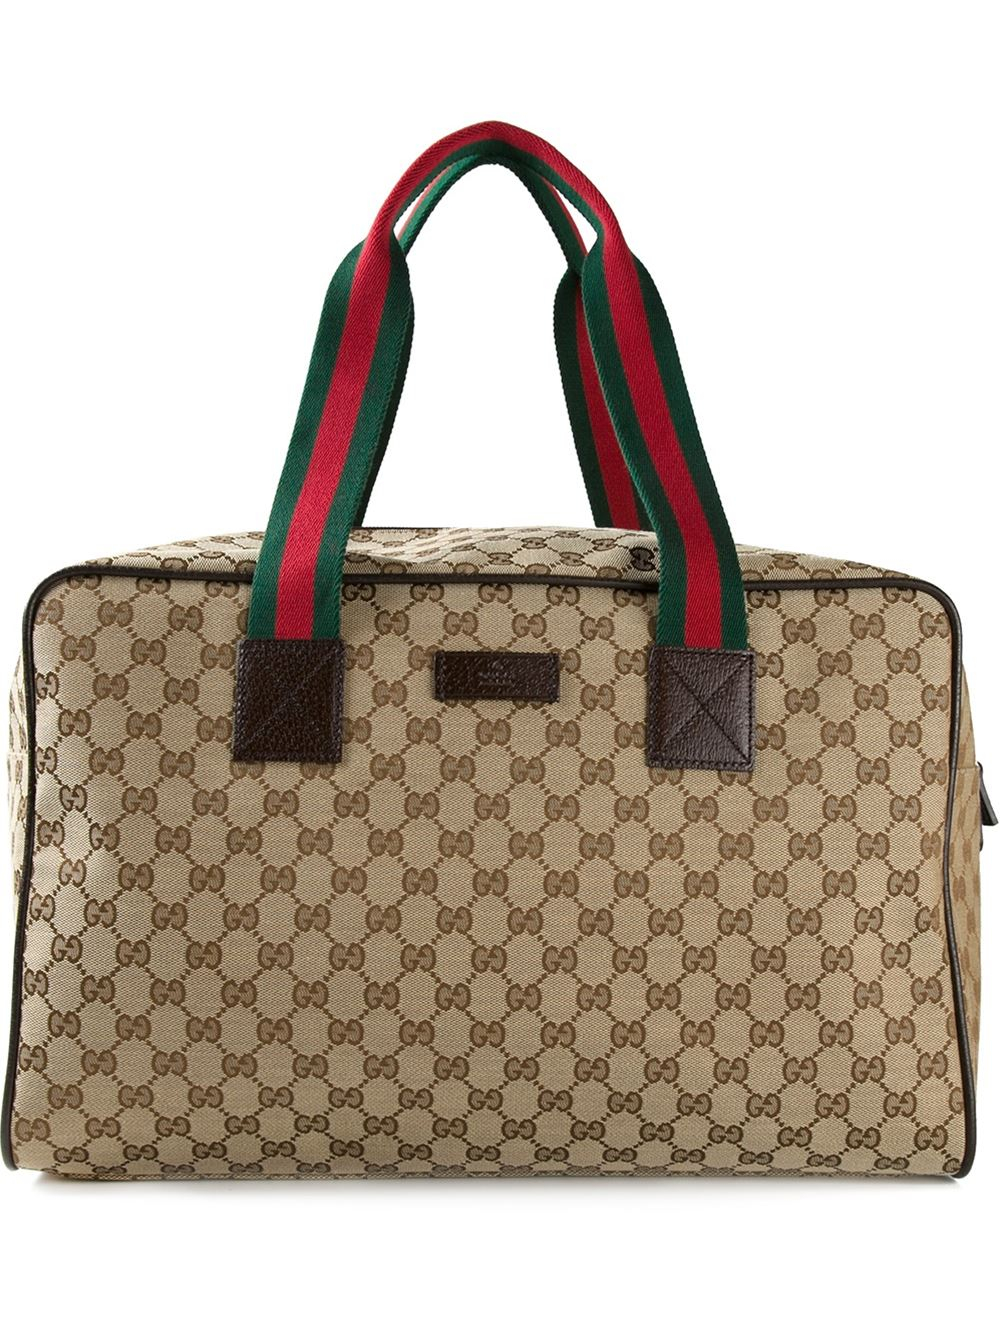 Gucci Signature Monogram Weekender Luggage in Natural for Men - Lyst